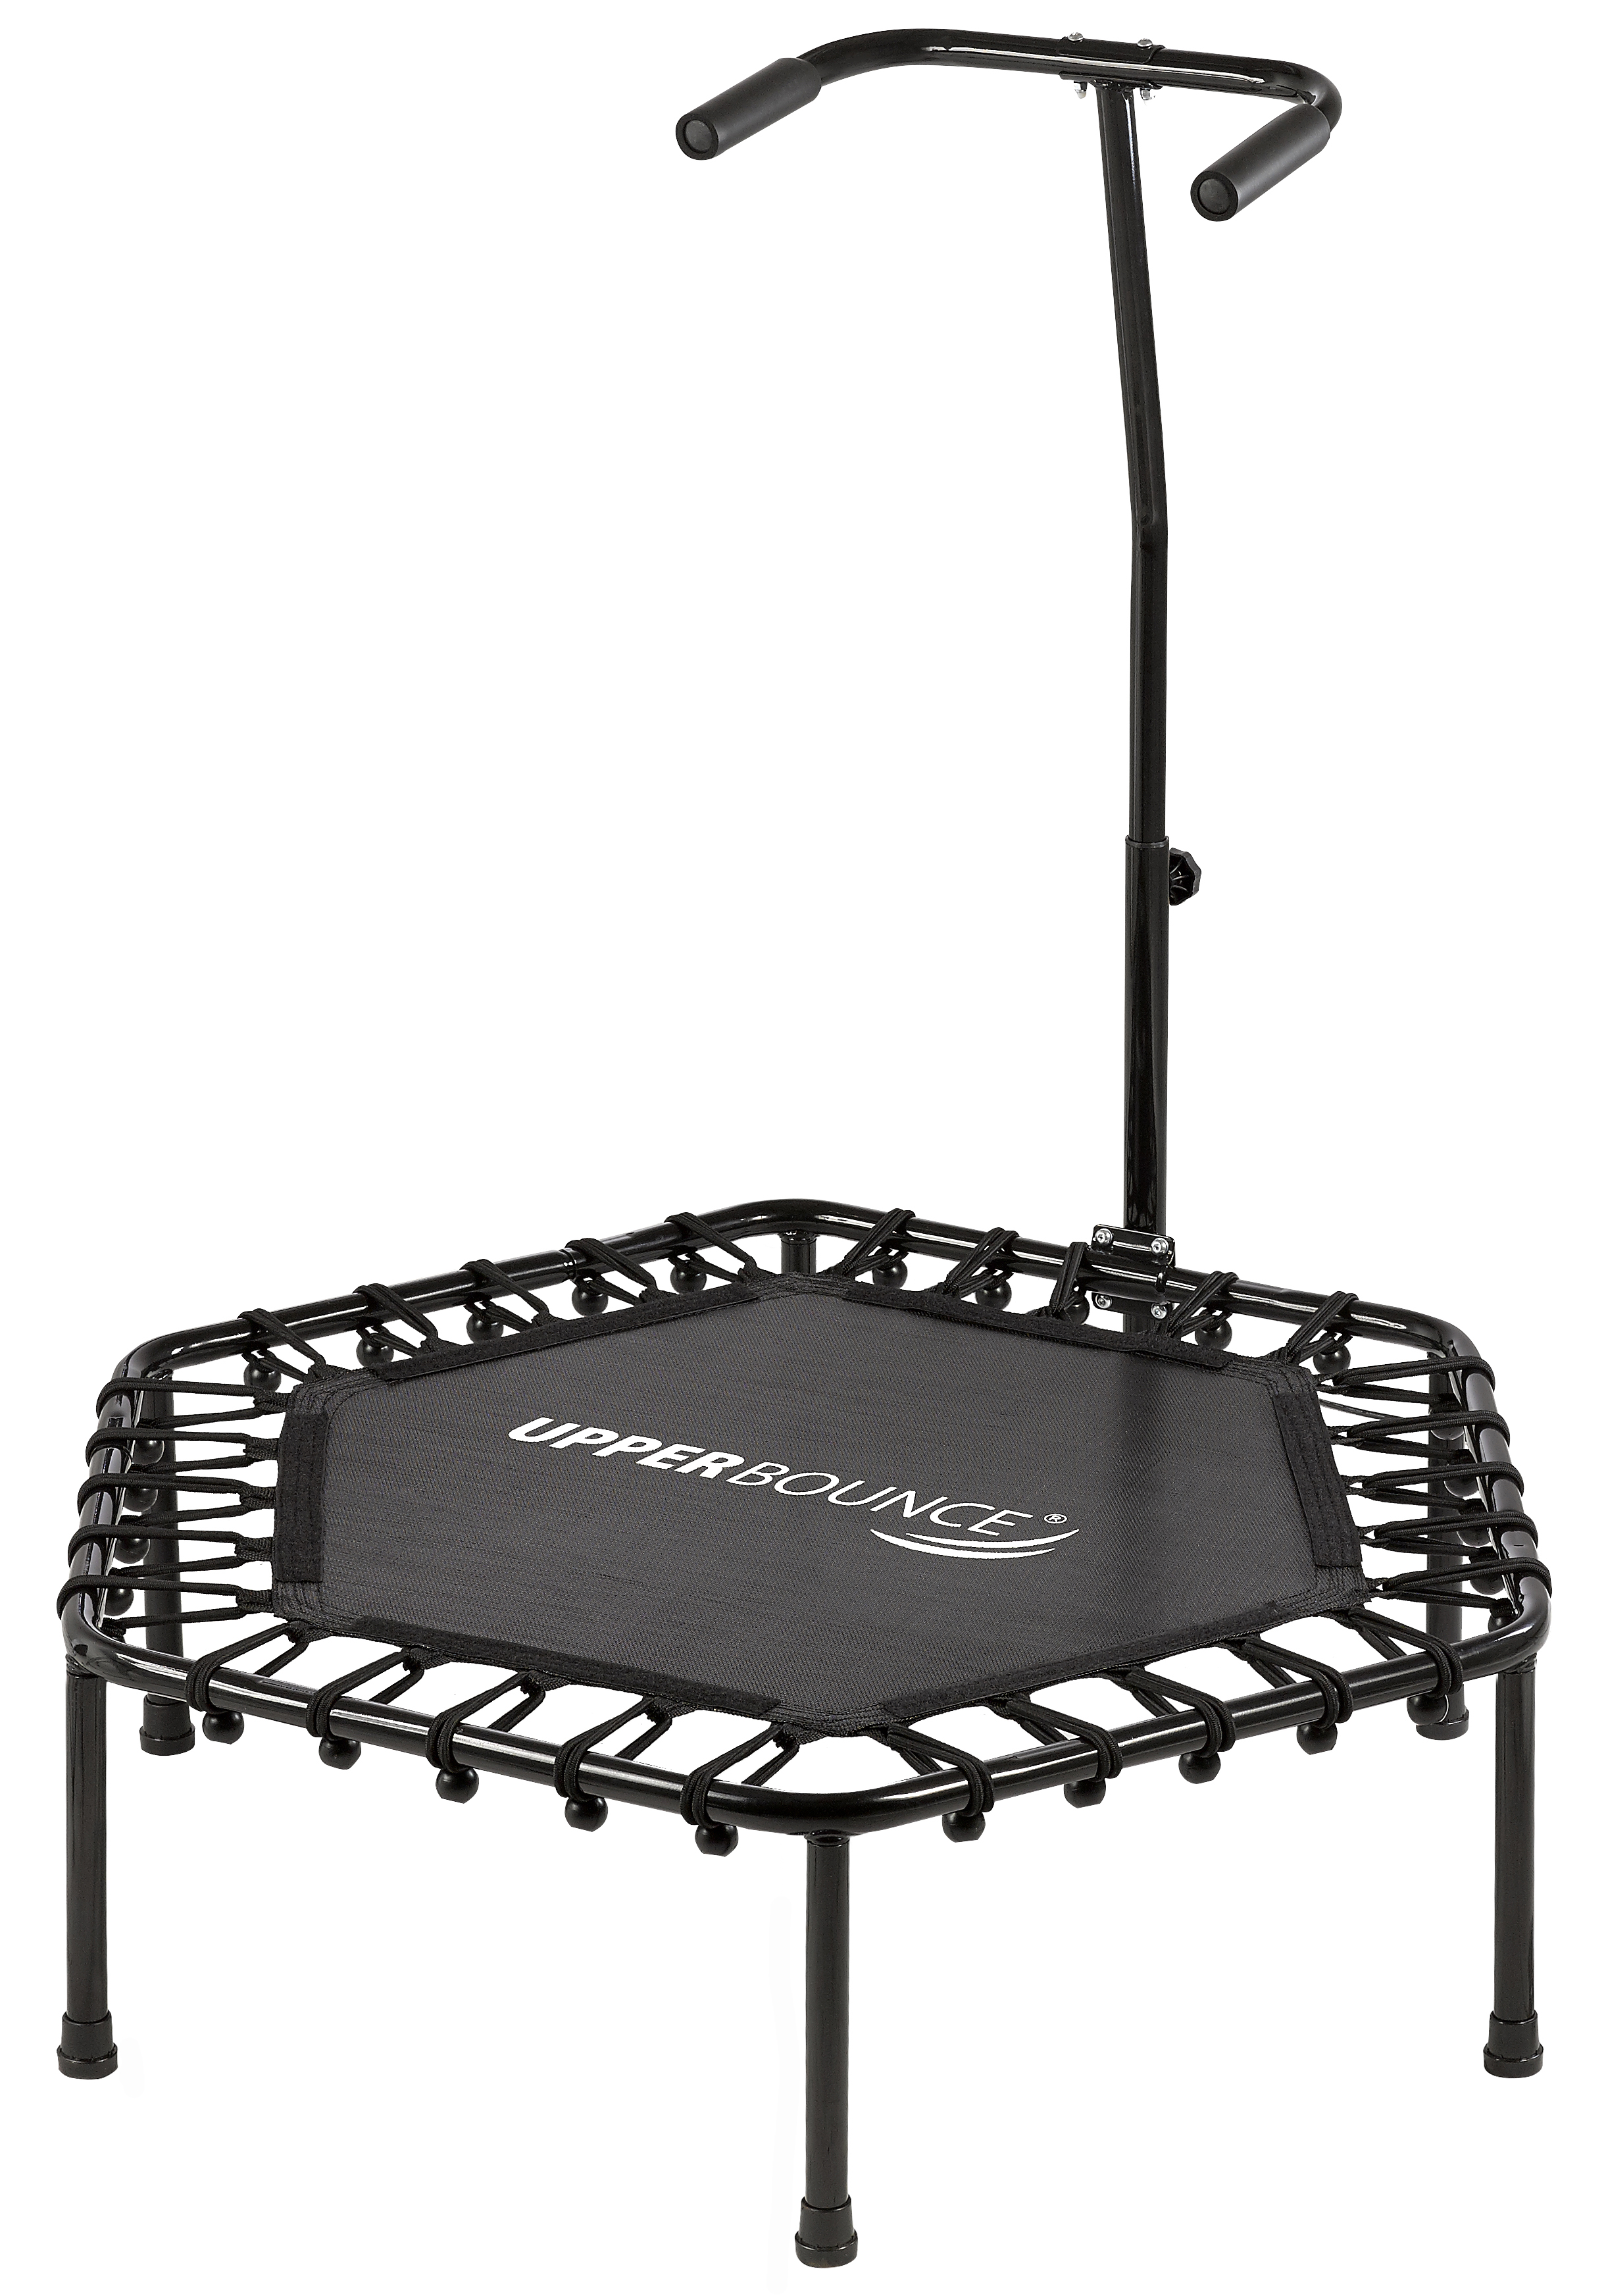 Upper Bounce Hexagonal Fitness Mini-Trampoline with Bungee Cord Suspension - 40